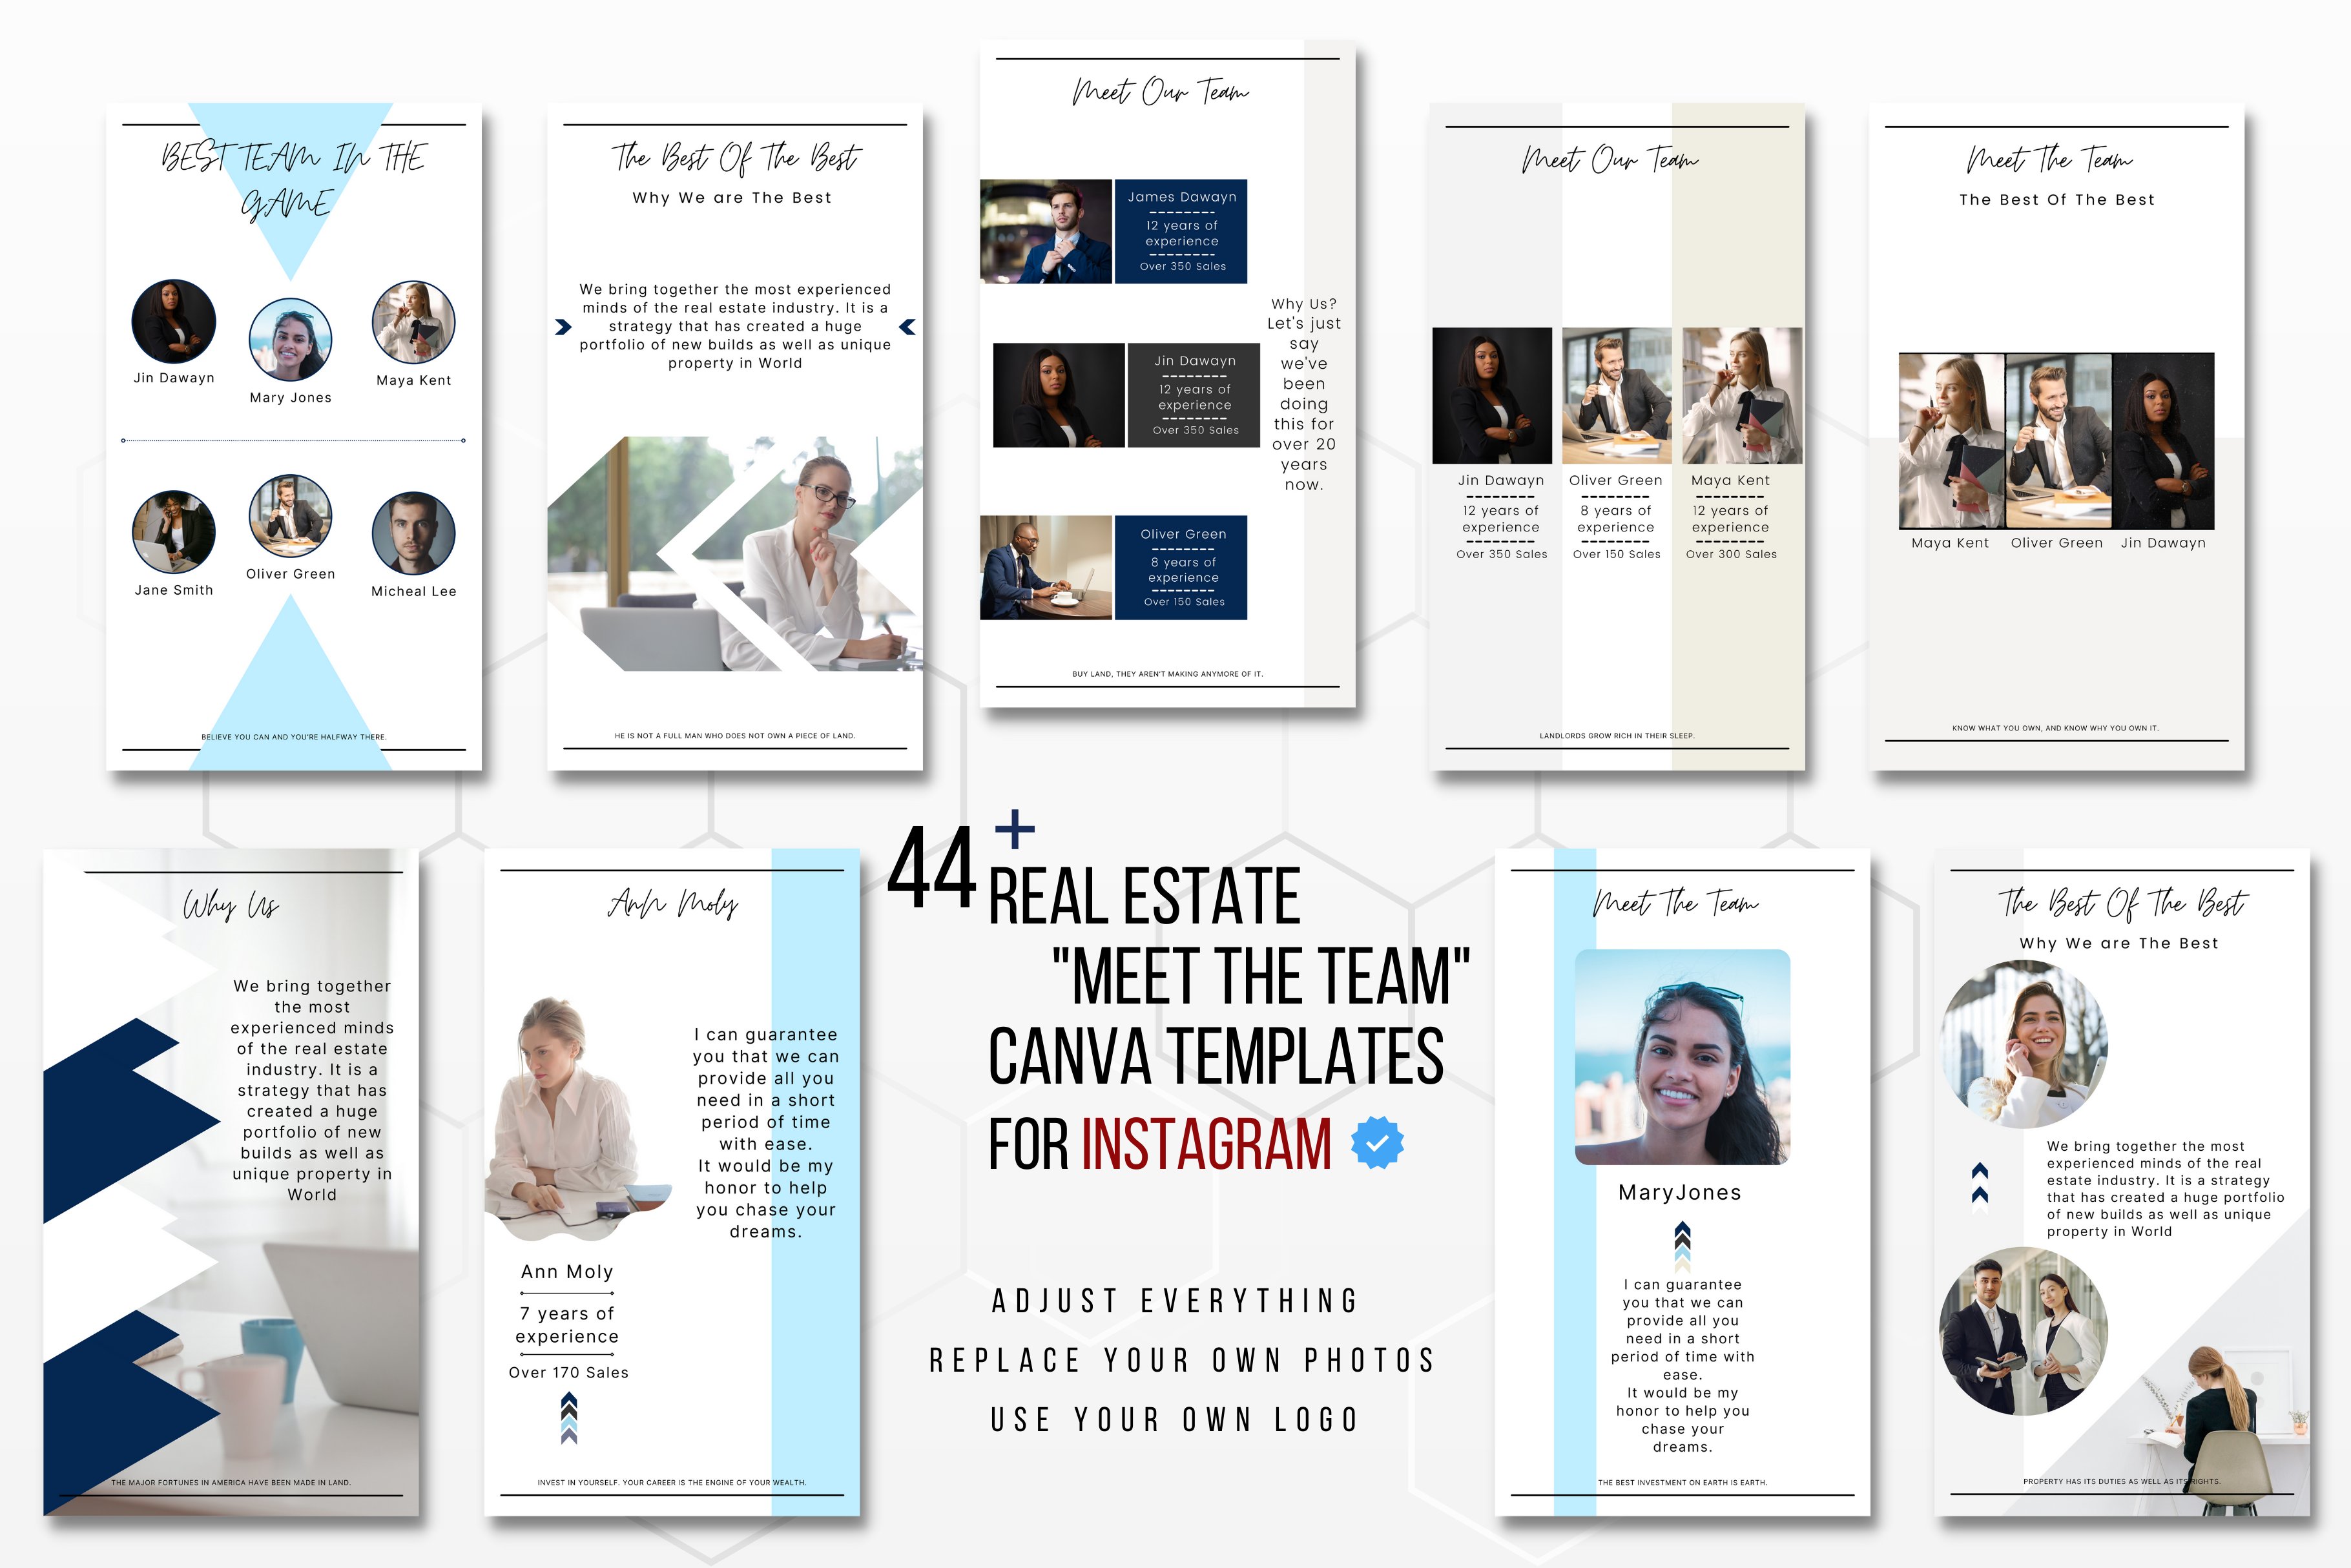 Meet The Team Canva Template by Kay Design on Dribbble